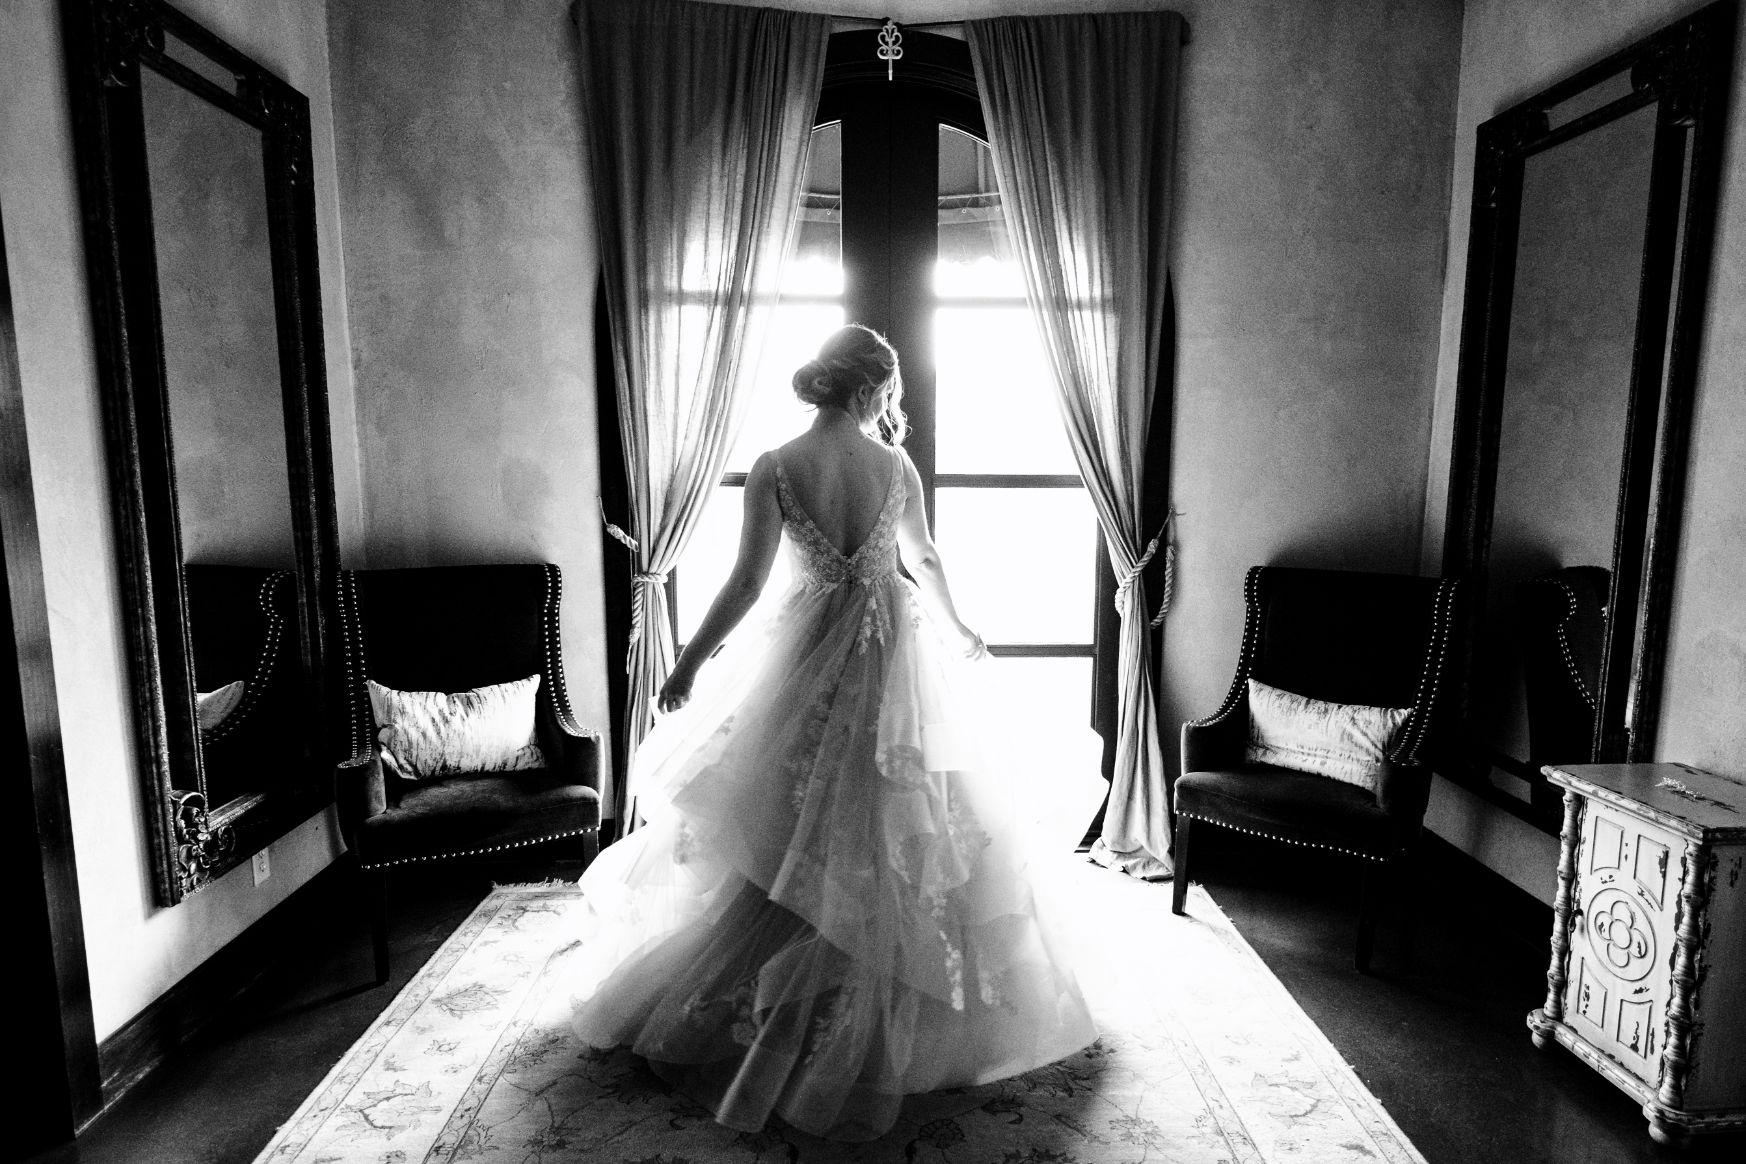 Black and white style image with bride twirling around with wedding dress.